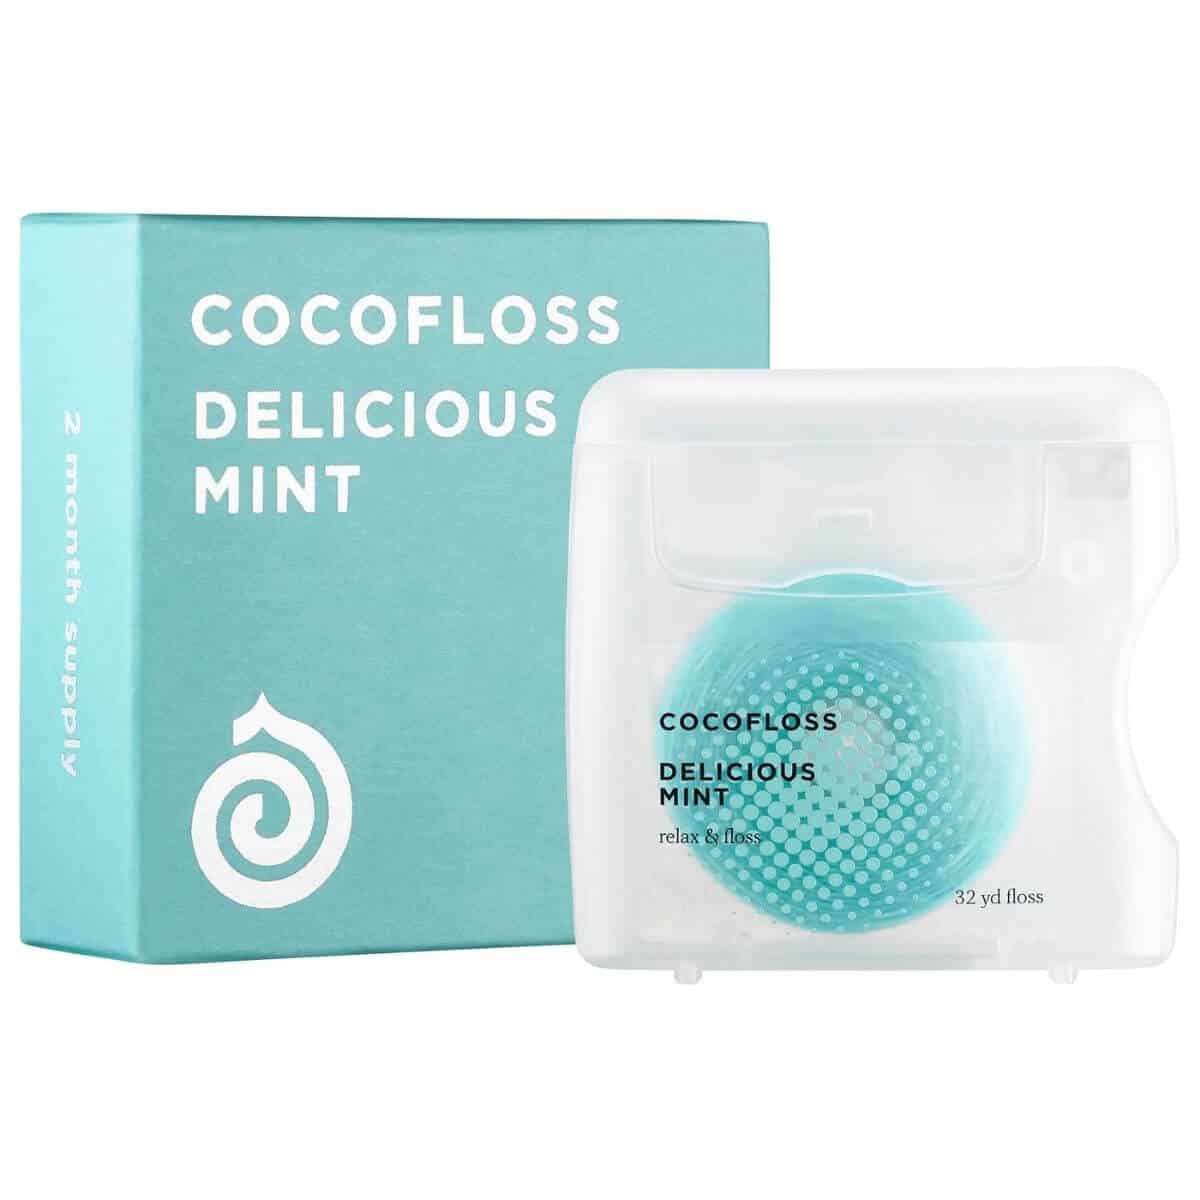 Cocofloss with its box.